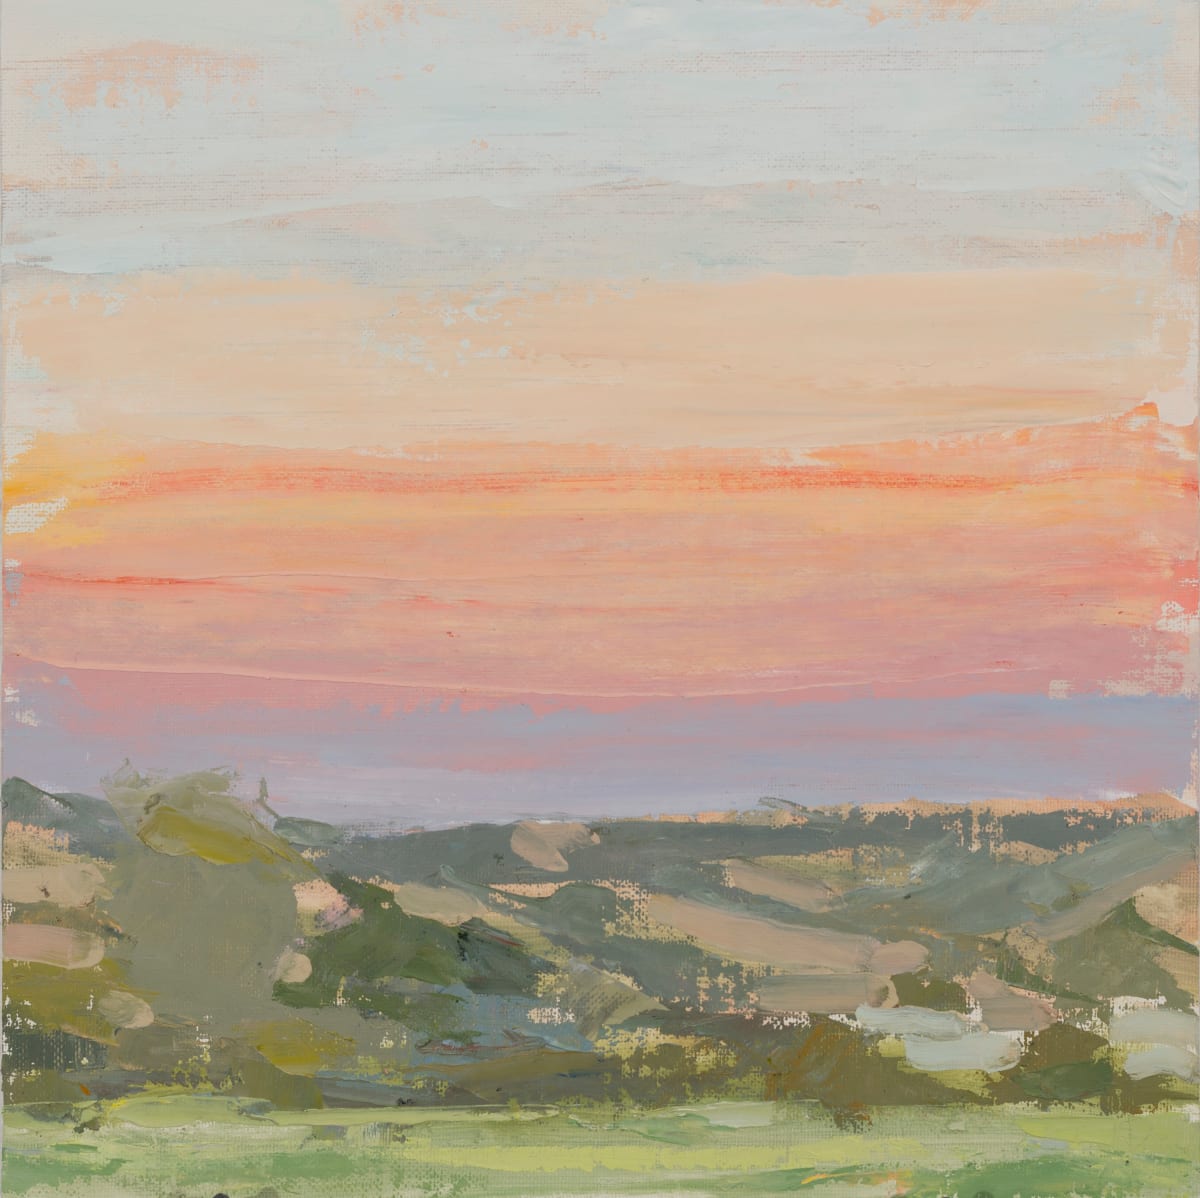 Smoky Sunset El Rito by Shawn Demarest  Image: Plein air. Smoke from NM forest fires in distance